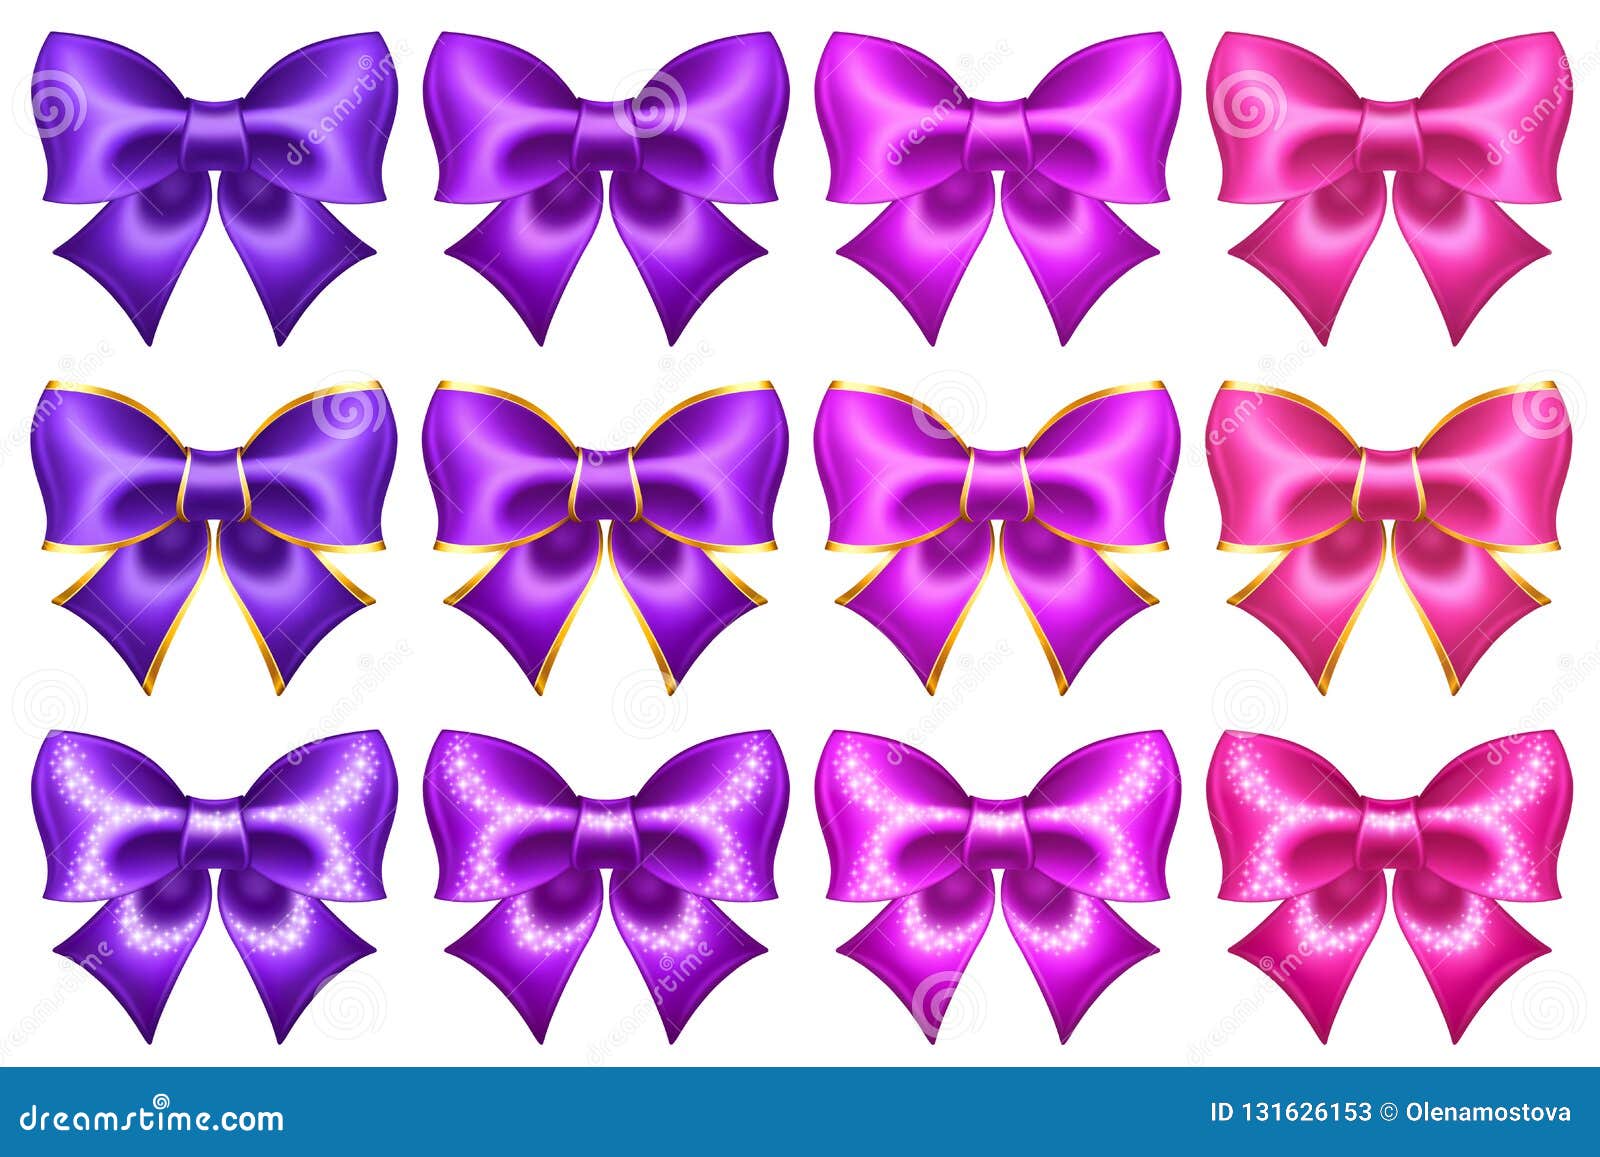 silk ultra violet and pink bows with golden border and glitter